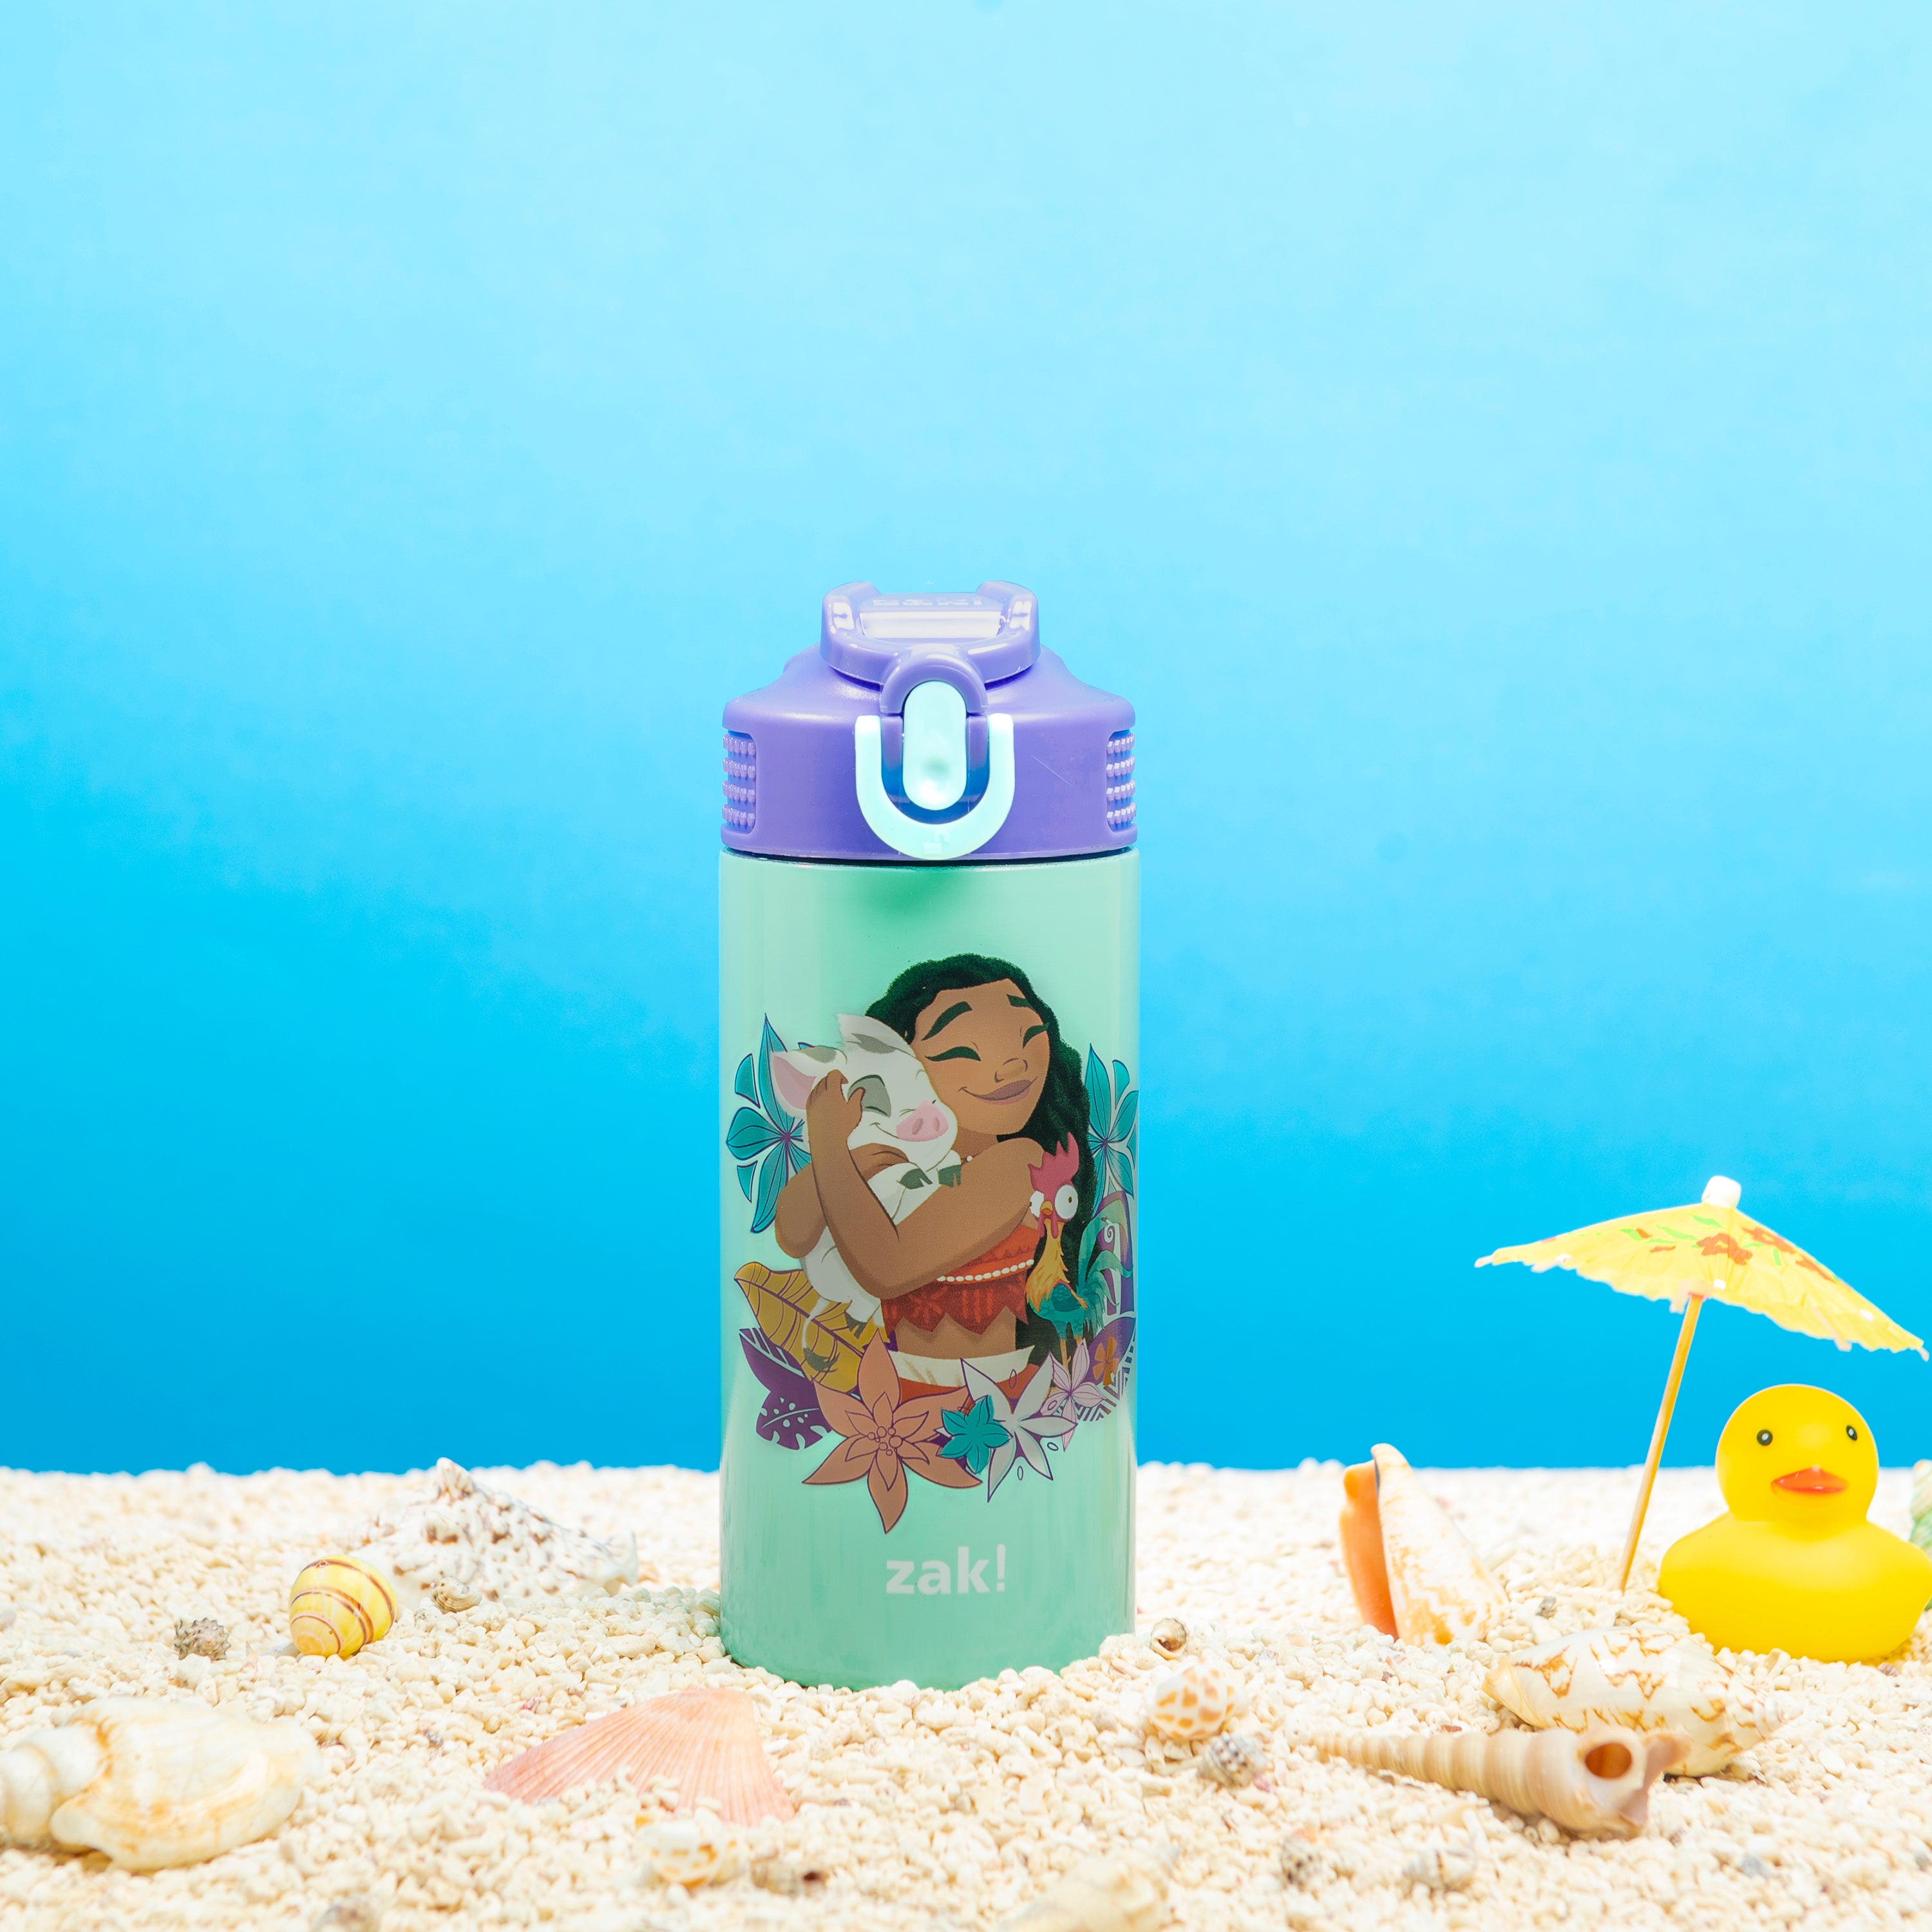 Cartoon Stitch Stainless Steel Vacuum Bottle Leakproof,Insulated for Hot or  Cold Stitch Water Bottle Travel Mug for Girl-11